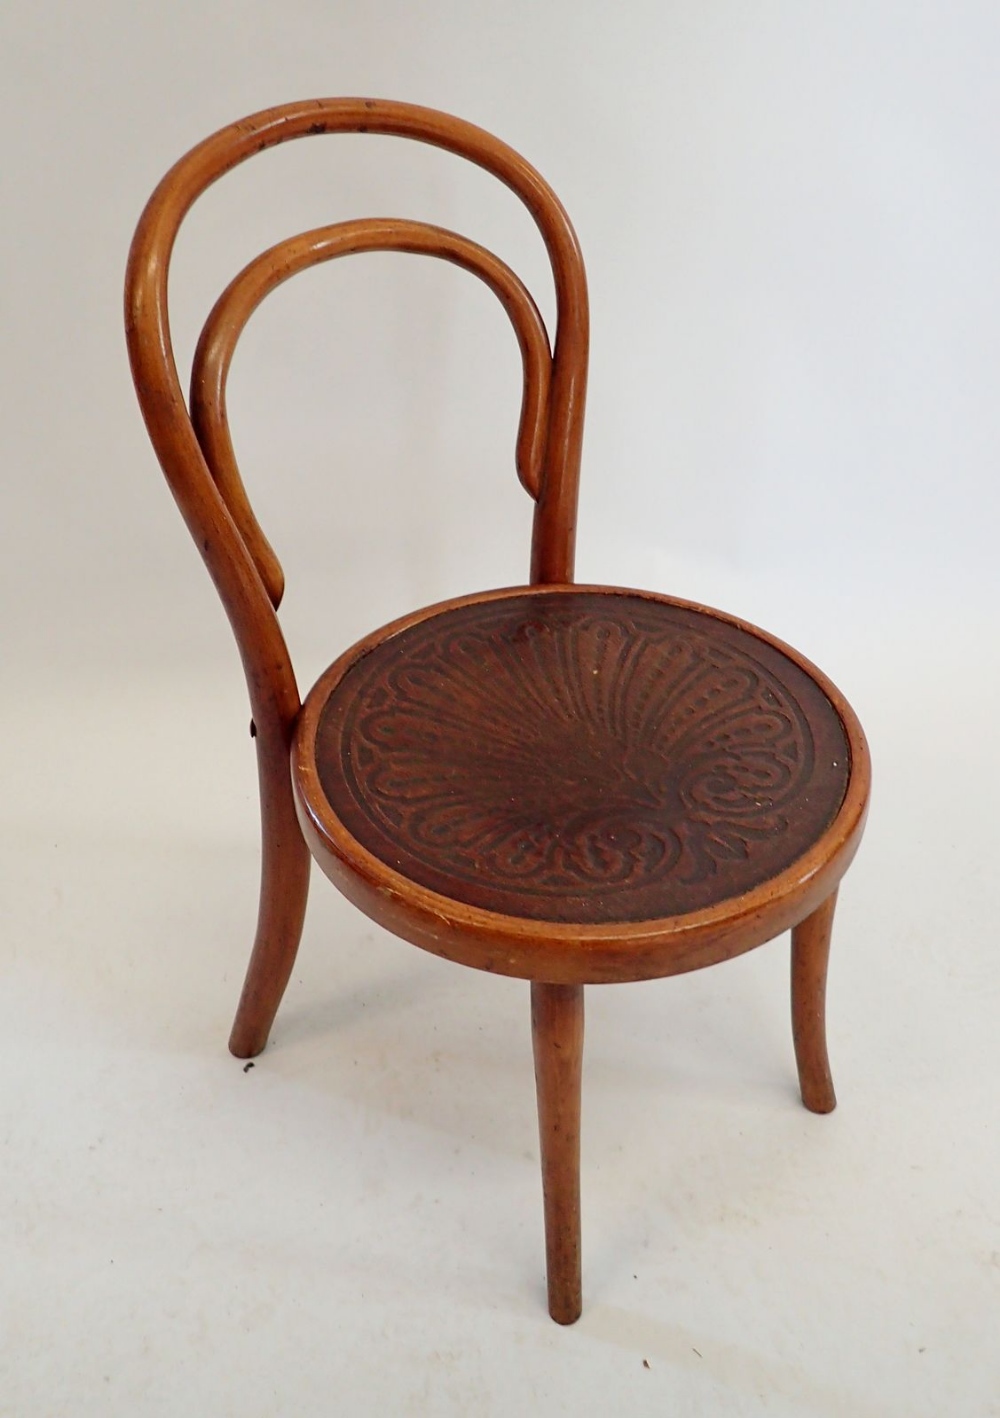 A Thonet bentwood child's chair with label